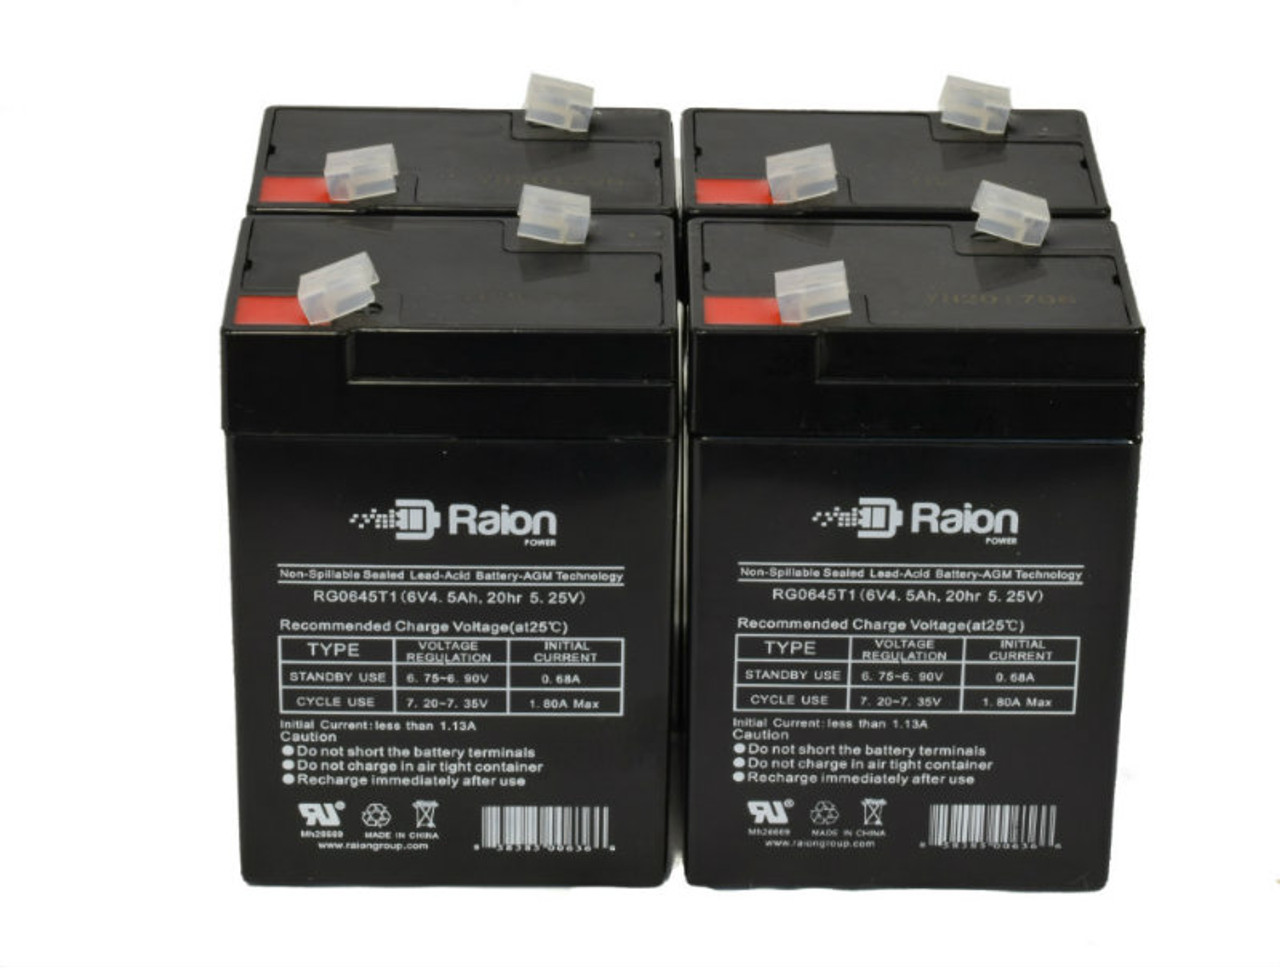 Raion Power 6 Volt 4.5Ah RG0645T1 Replacement Battery for Sheng Yang SY645 - 4 Pack